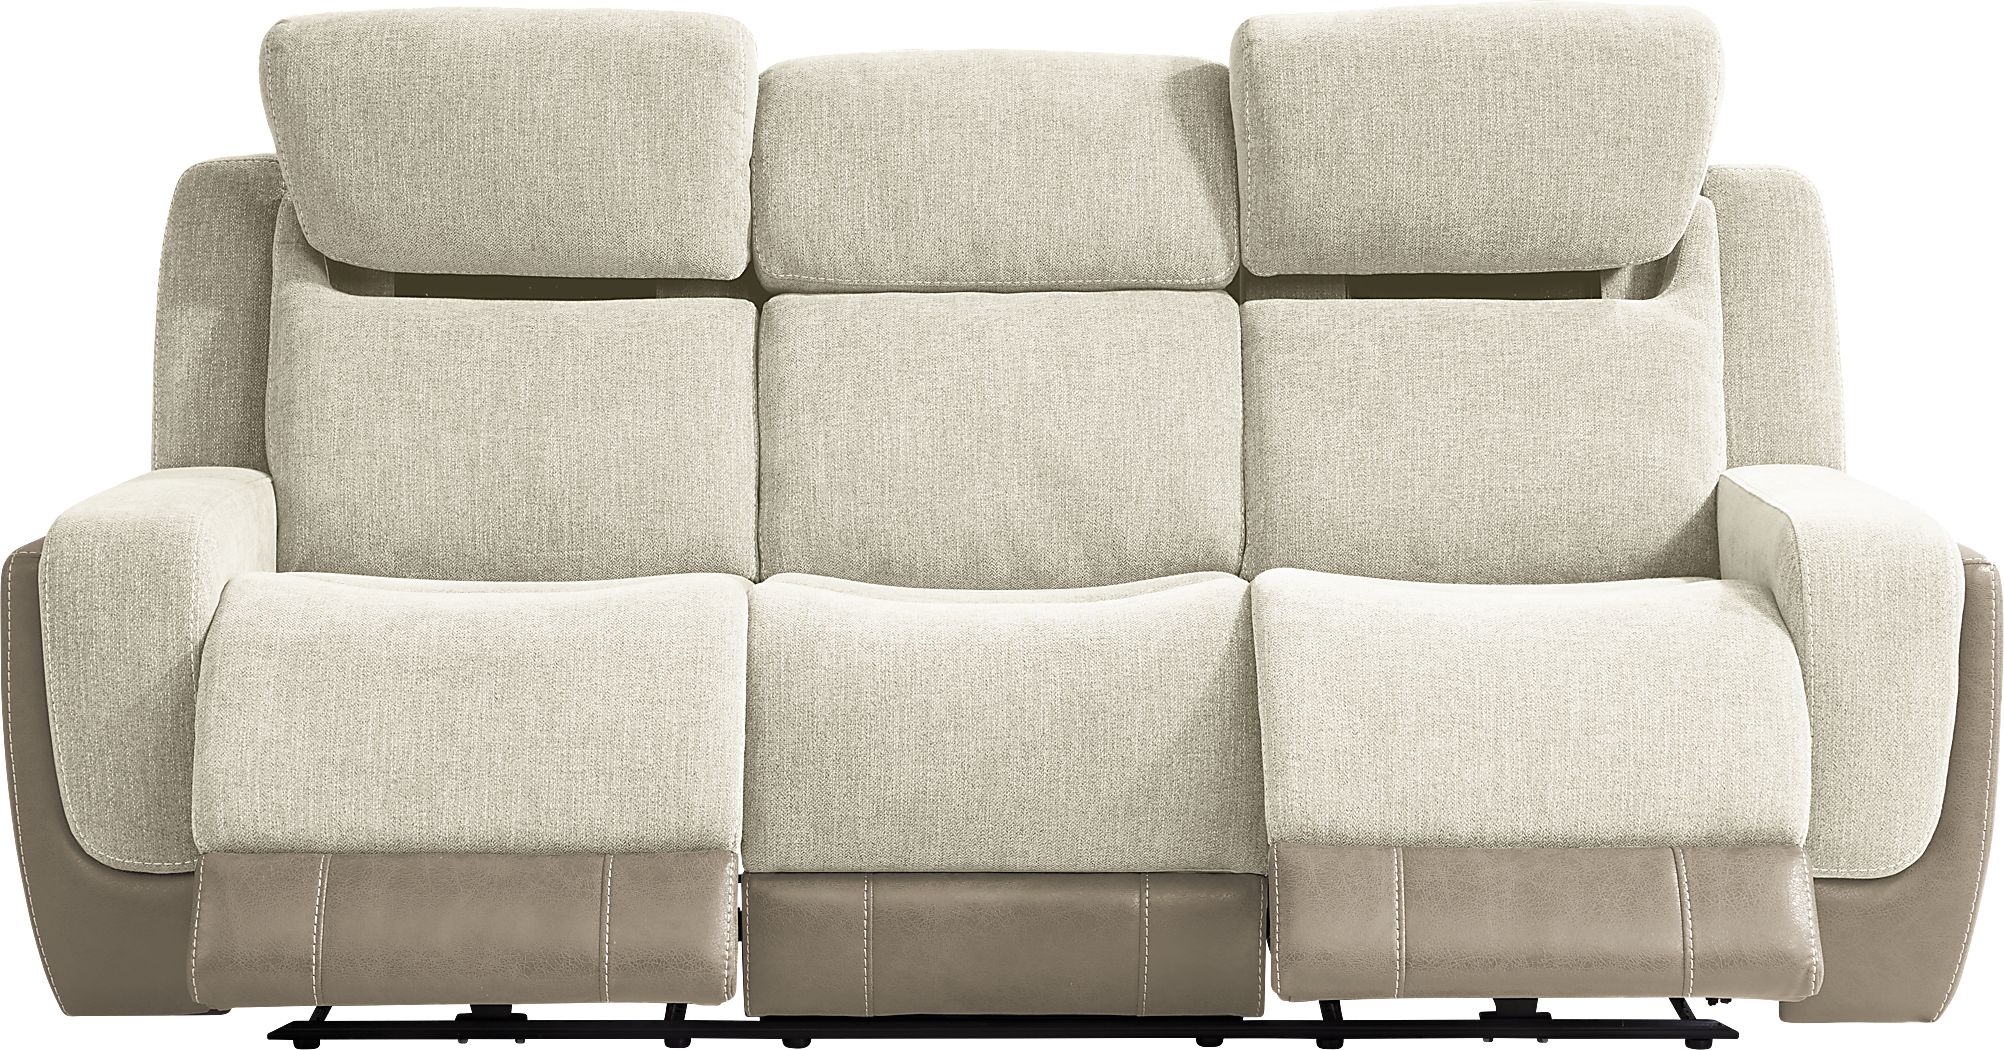 Rooms To Go State Street Beige Reclining Sofa